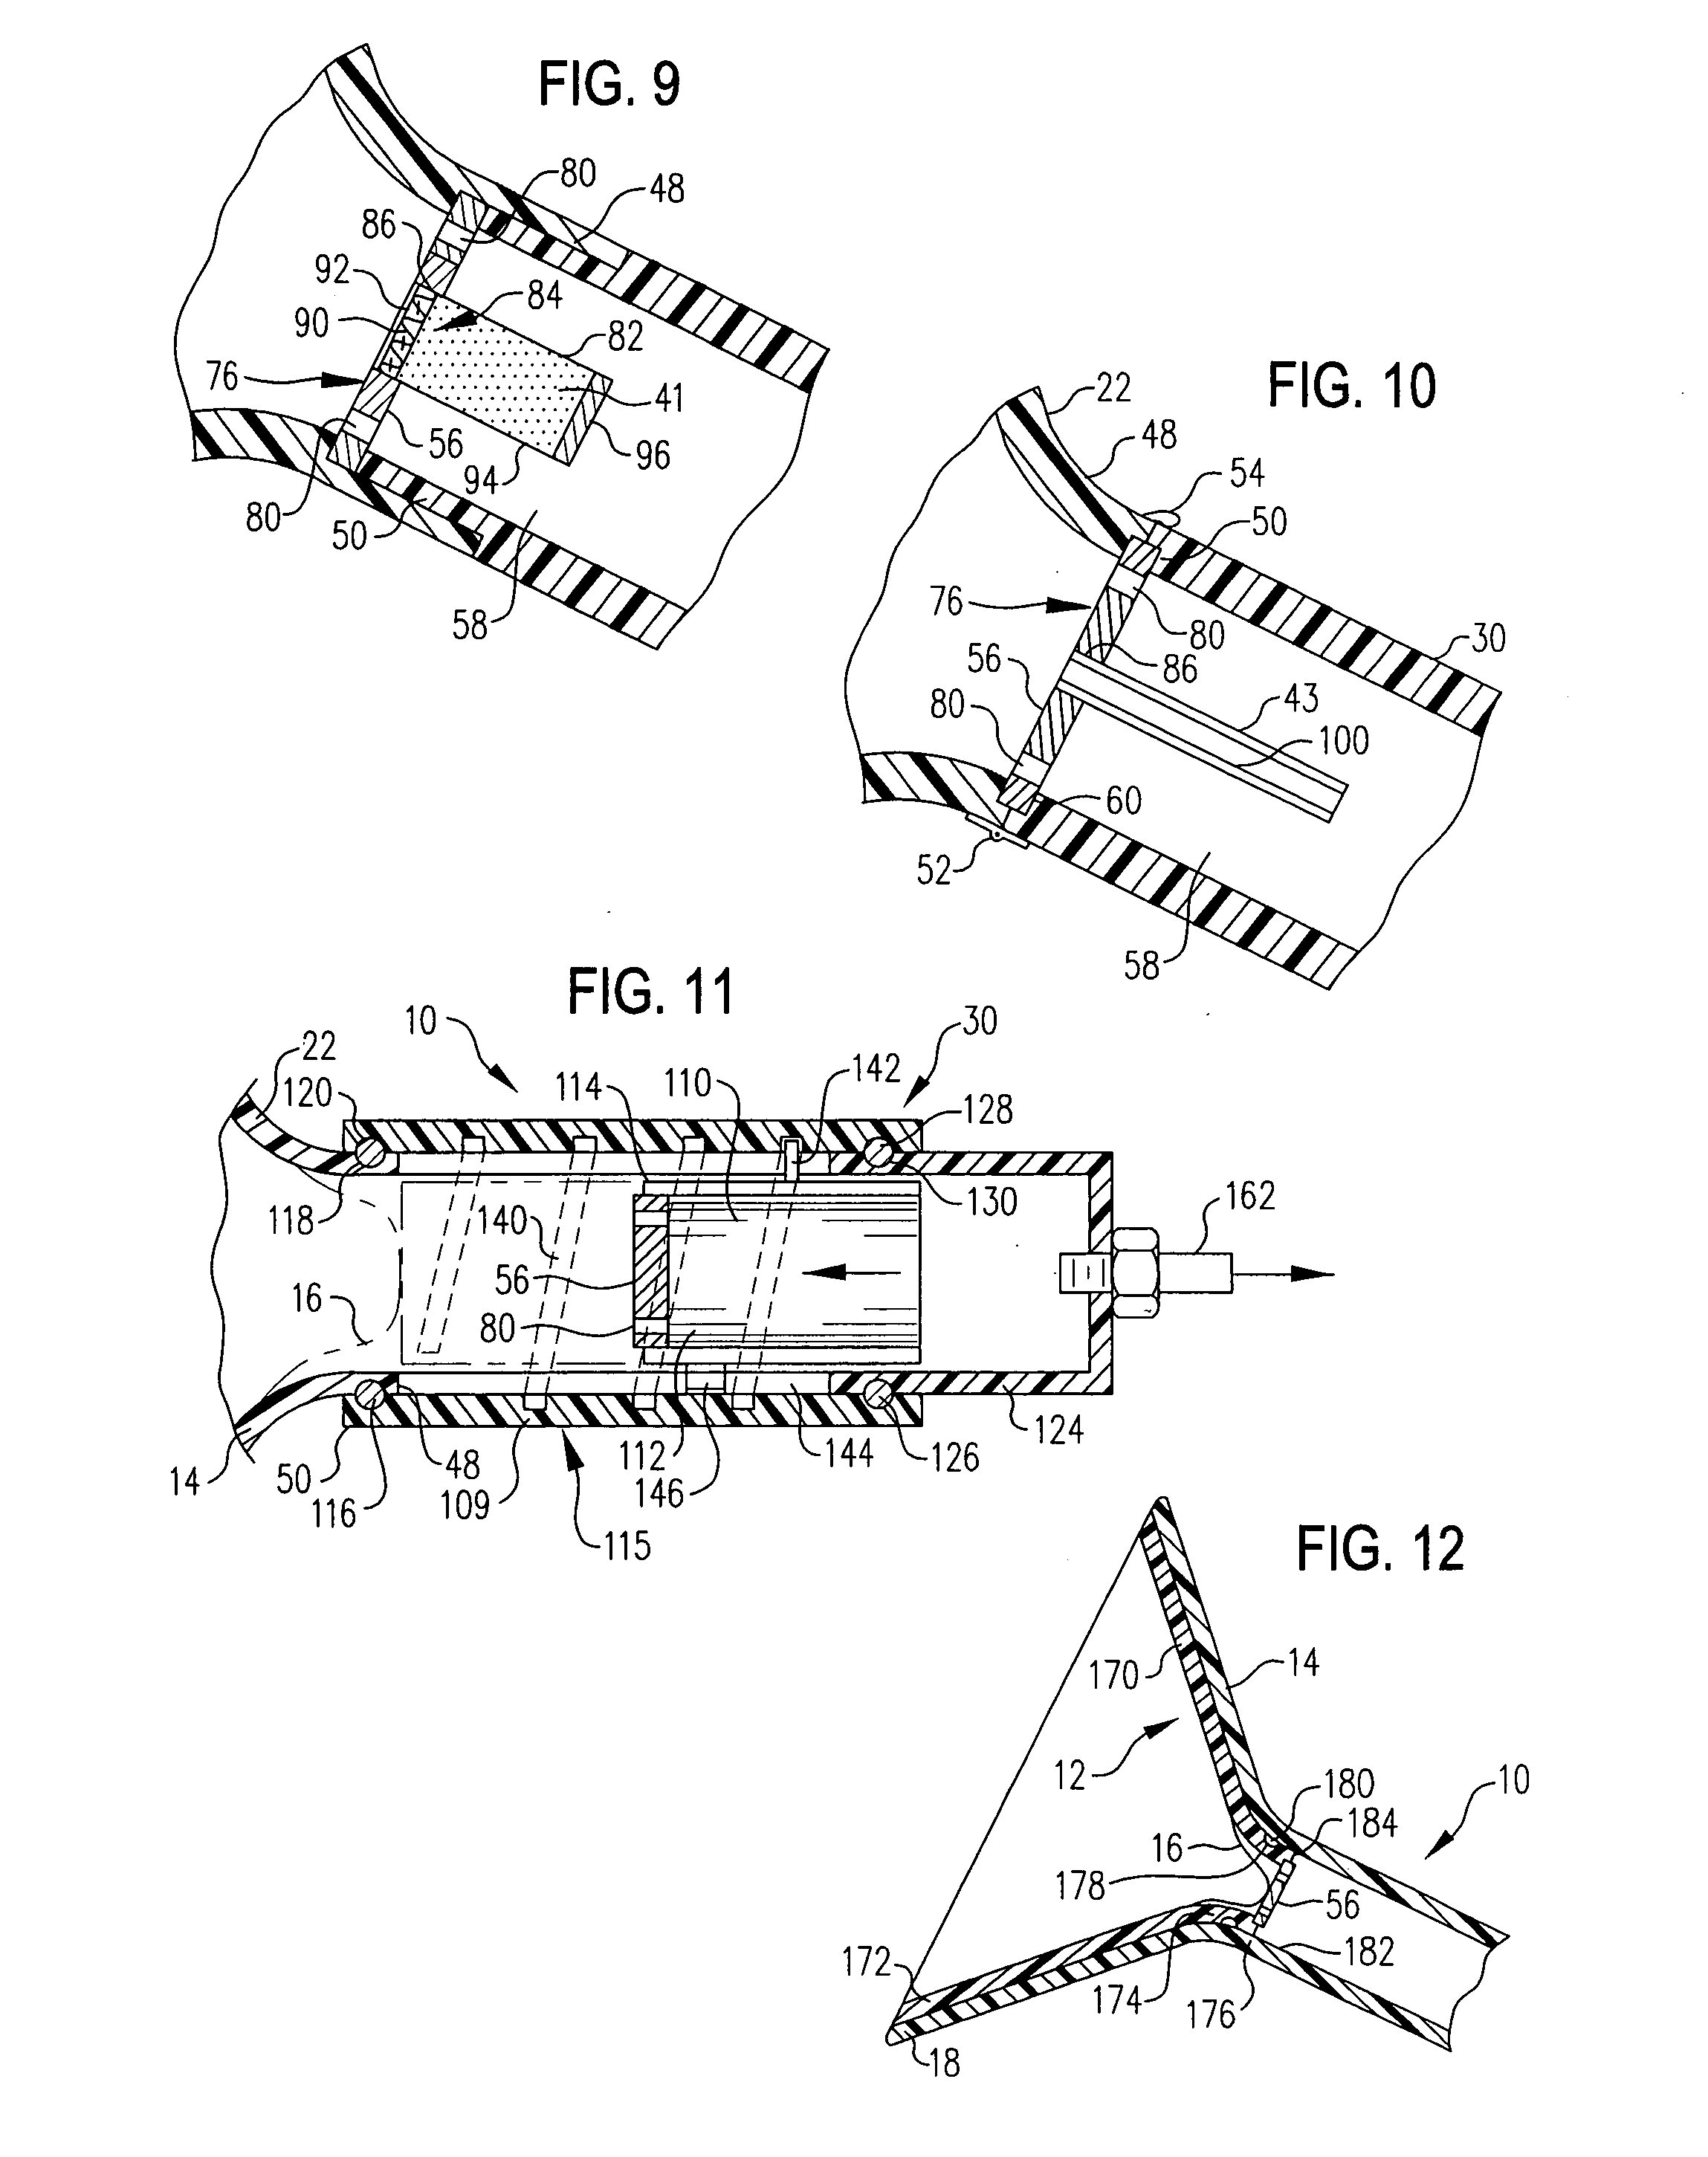 Devices and methods for obtaining mammary fluid samples for evaluating breast diseases, including cancer